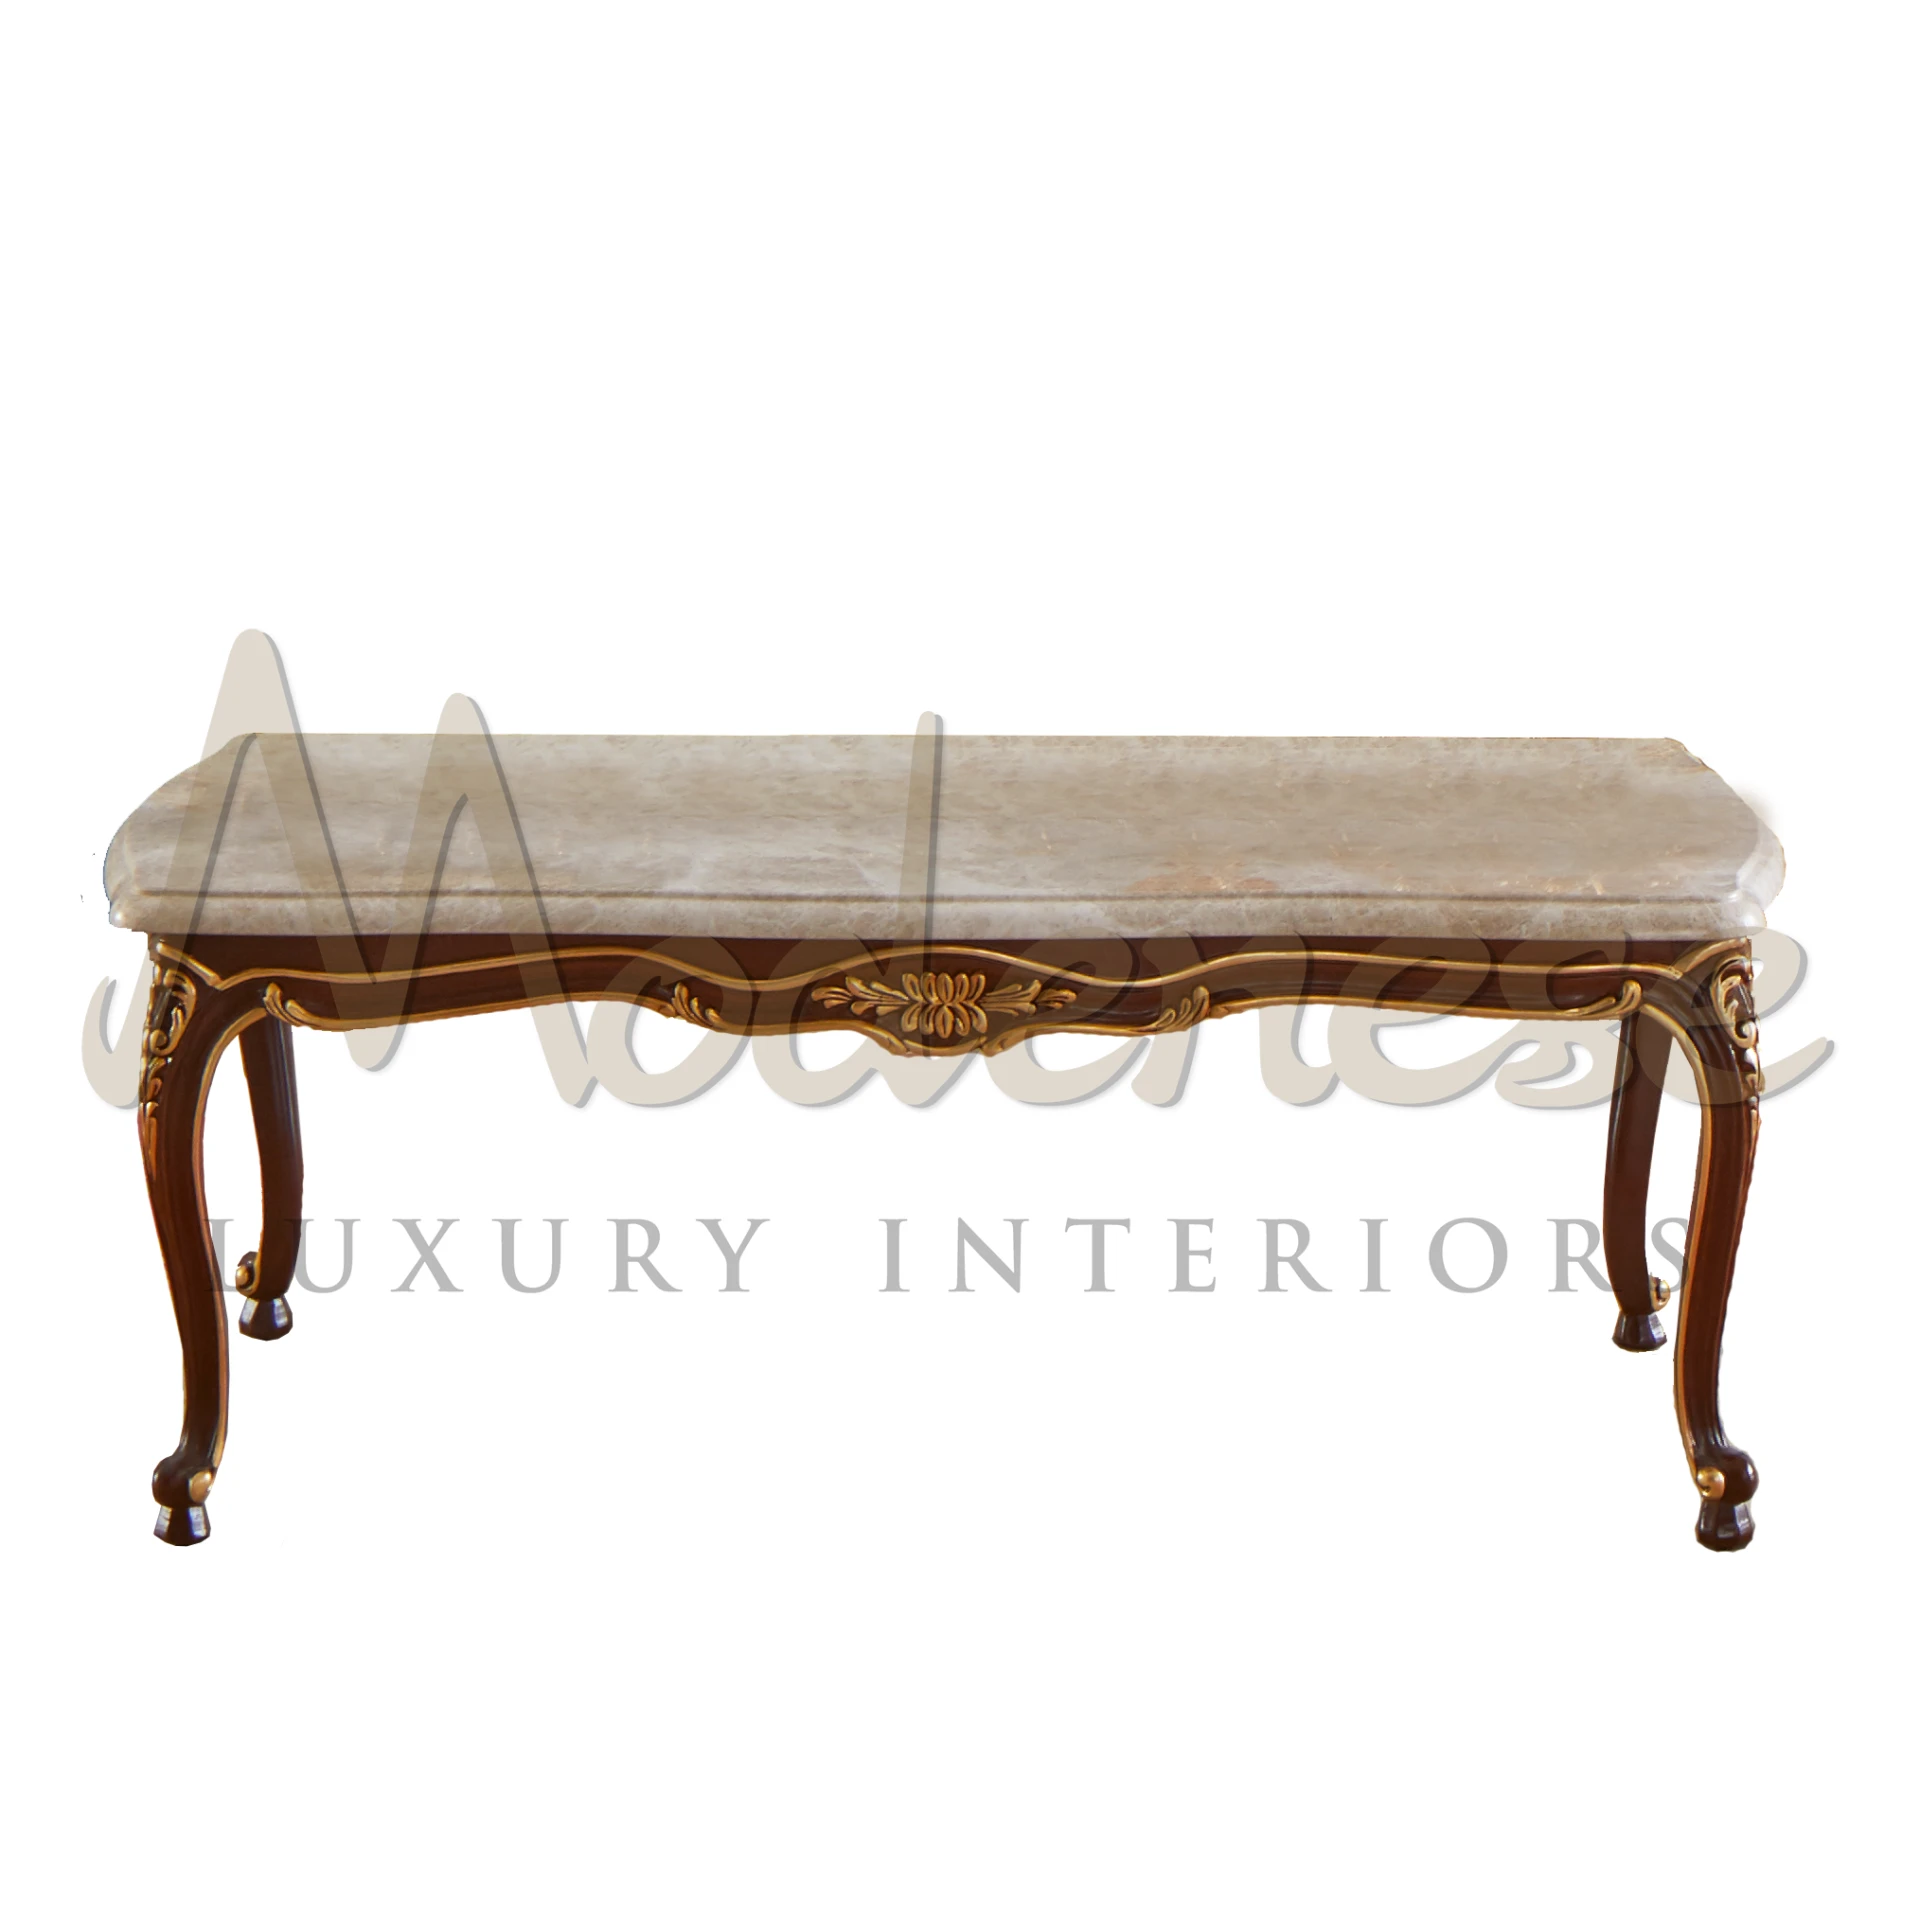 Luxurious Emperador Light Coffee Table with gold leaf finish, showcasing rich Italian design in classic interior settings